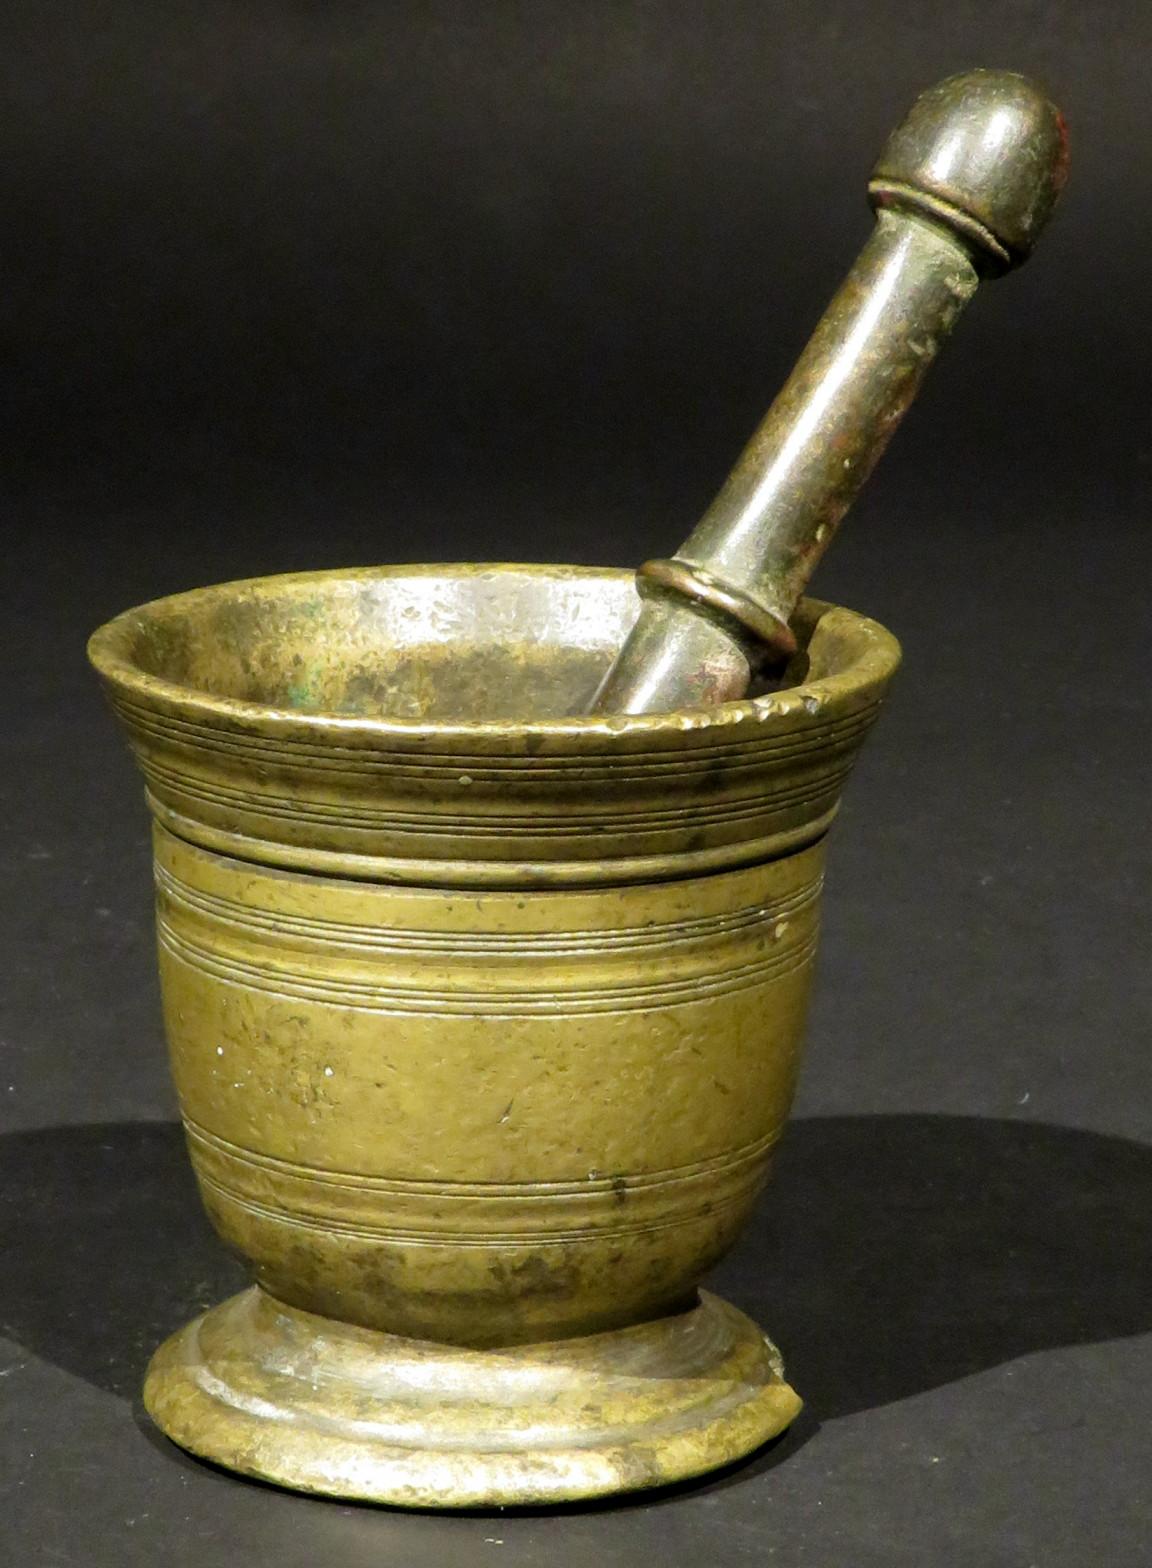 The cup shaped cast body decorated with incised ring-turned detail, rising from a waisted & stepped circular foot, together with its original pestle.
Combined weight, 3.75 lbs.
 